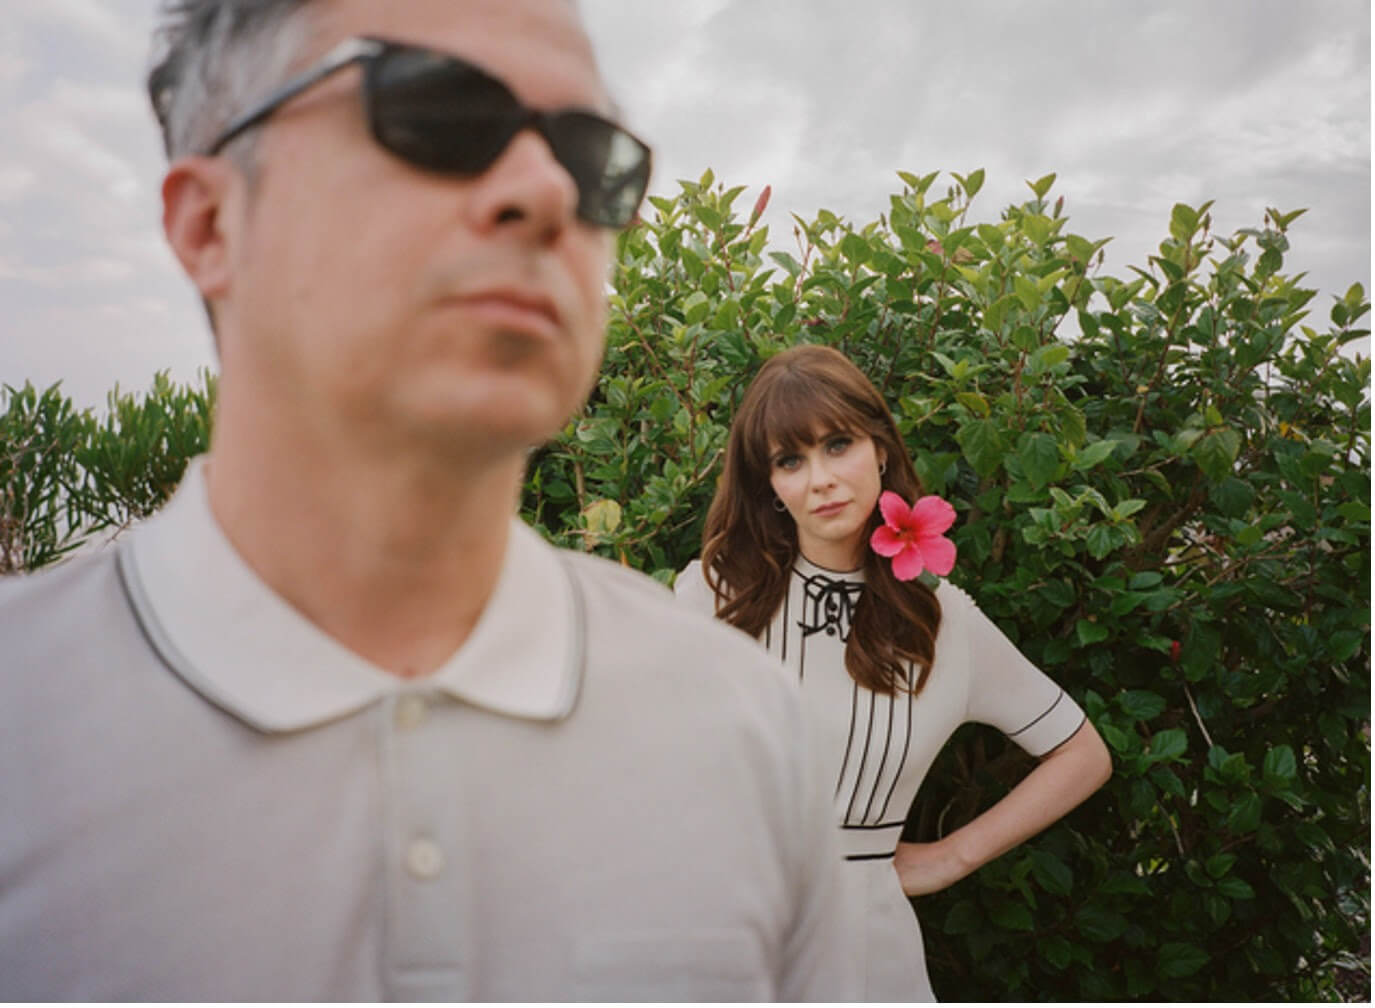 She & Him have the second single, "Wouldn’t It Be Nice", off their upcoming album, Melt Away: A Tribute to Brian Wilson via Fantasy Records